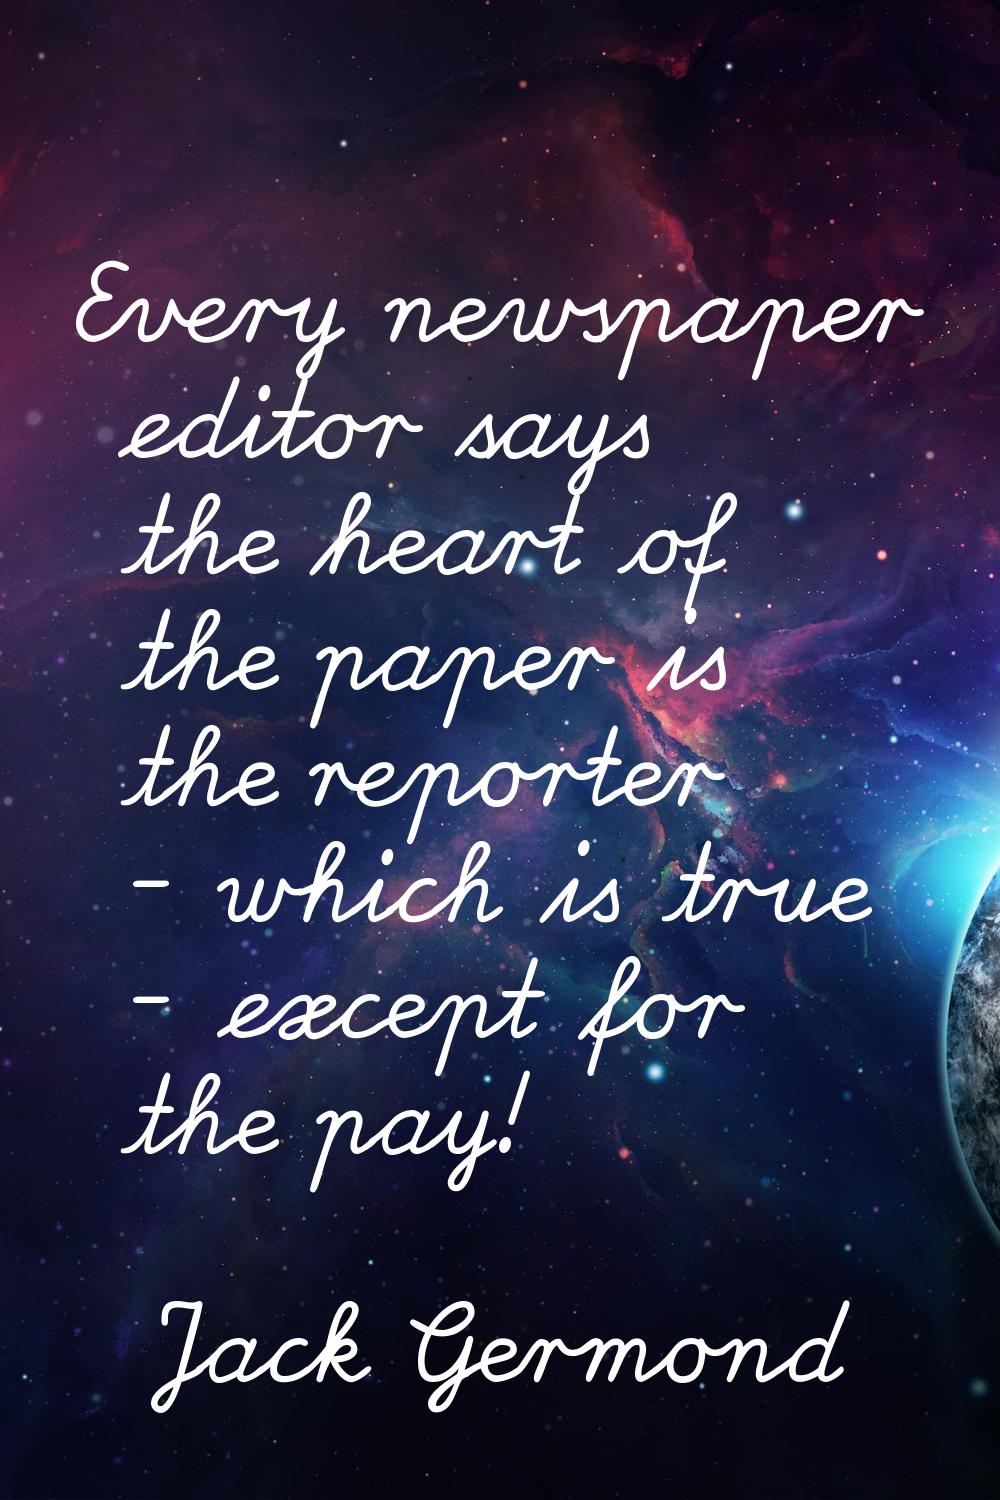 Every newspaper editor says the heart of the paper is the reporter - which is true - except for the